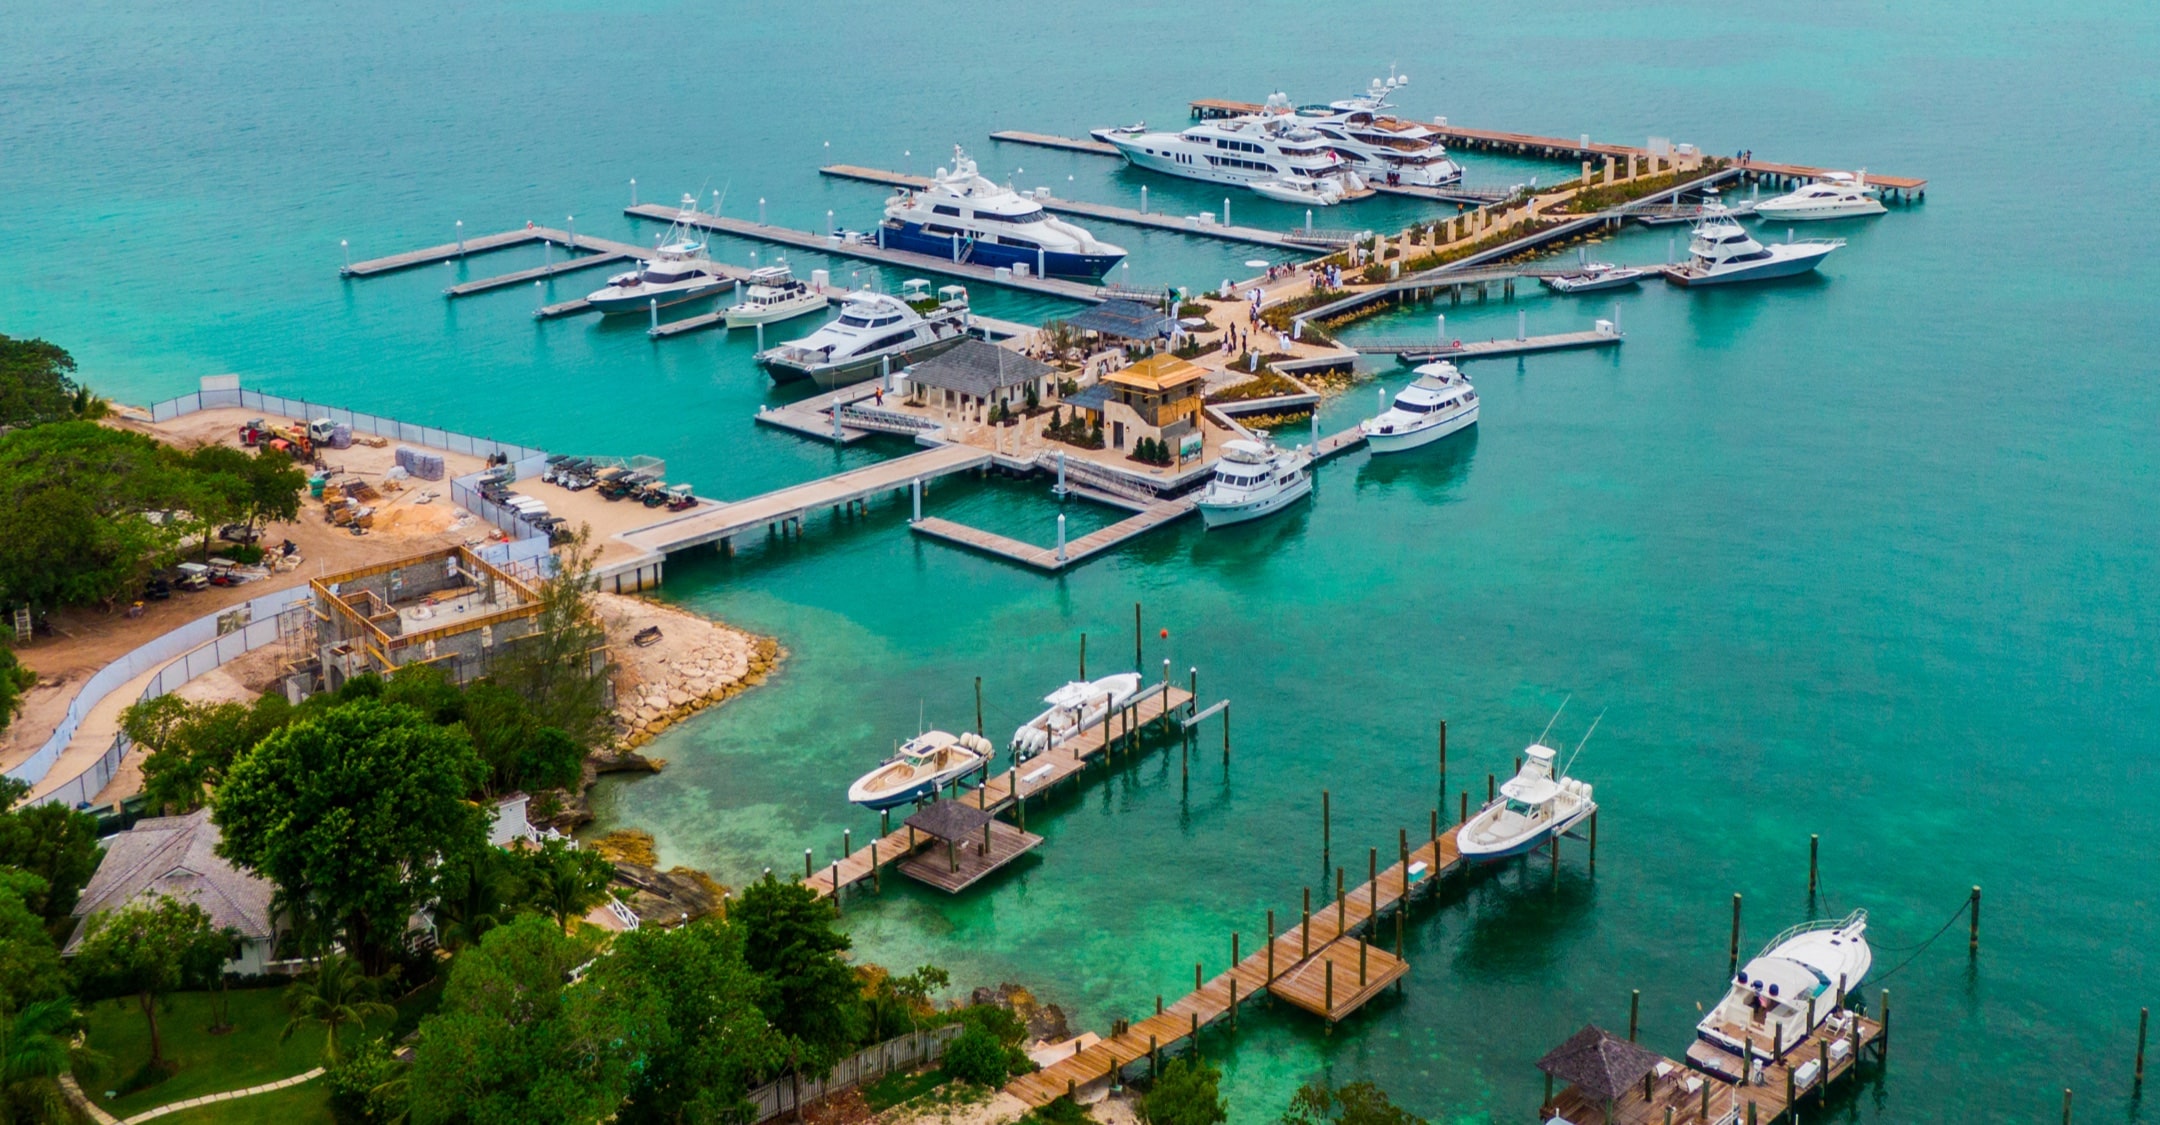 Turnkey aluminum marina with integrated landscaping features in the Bahamas